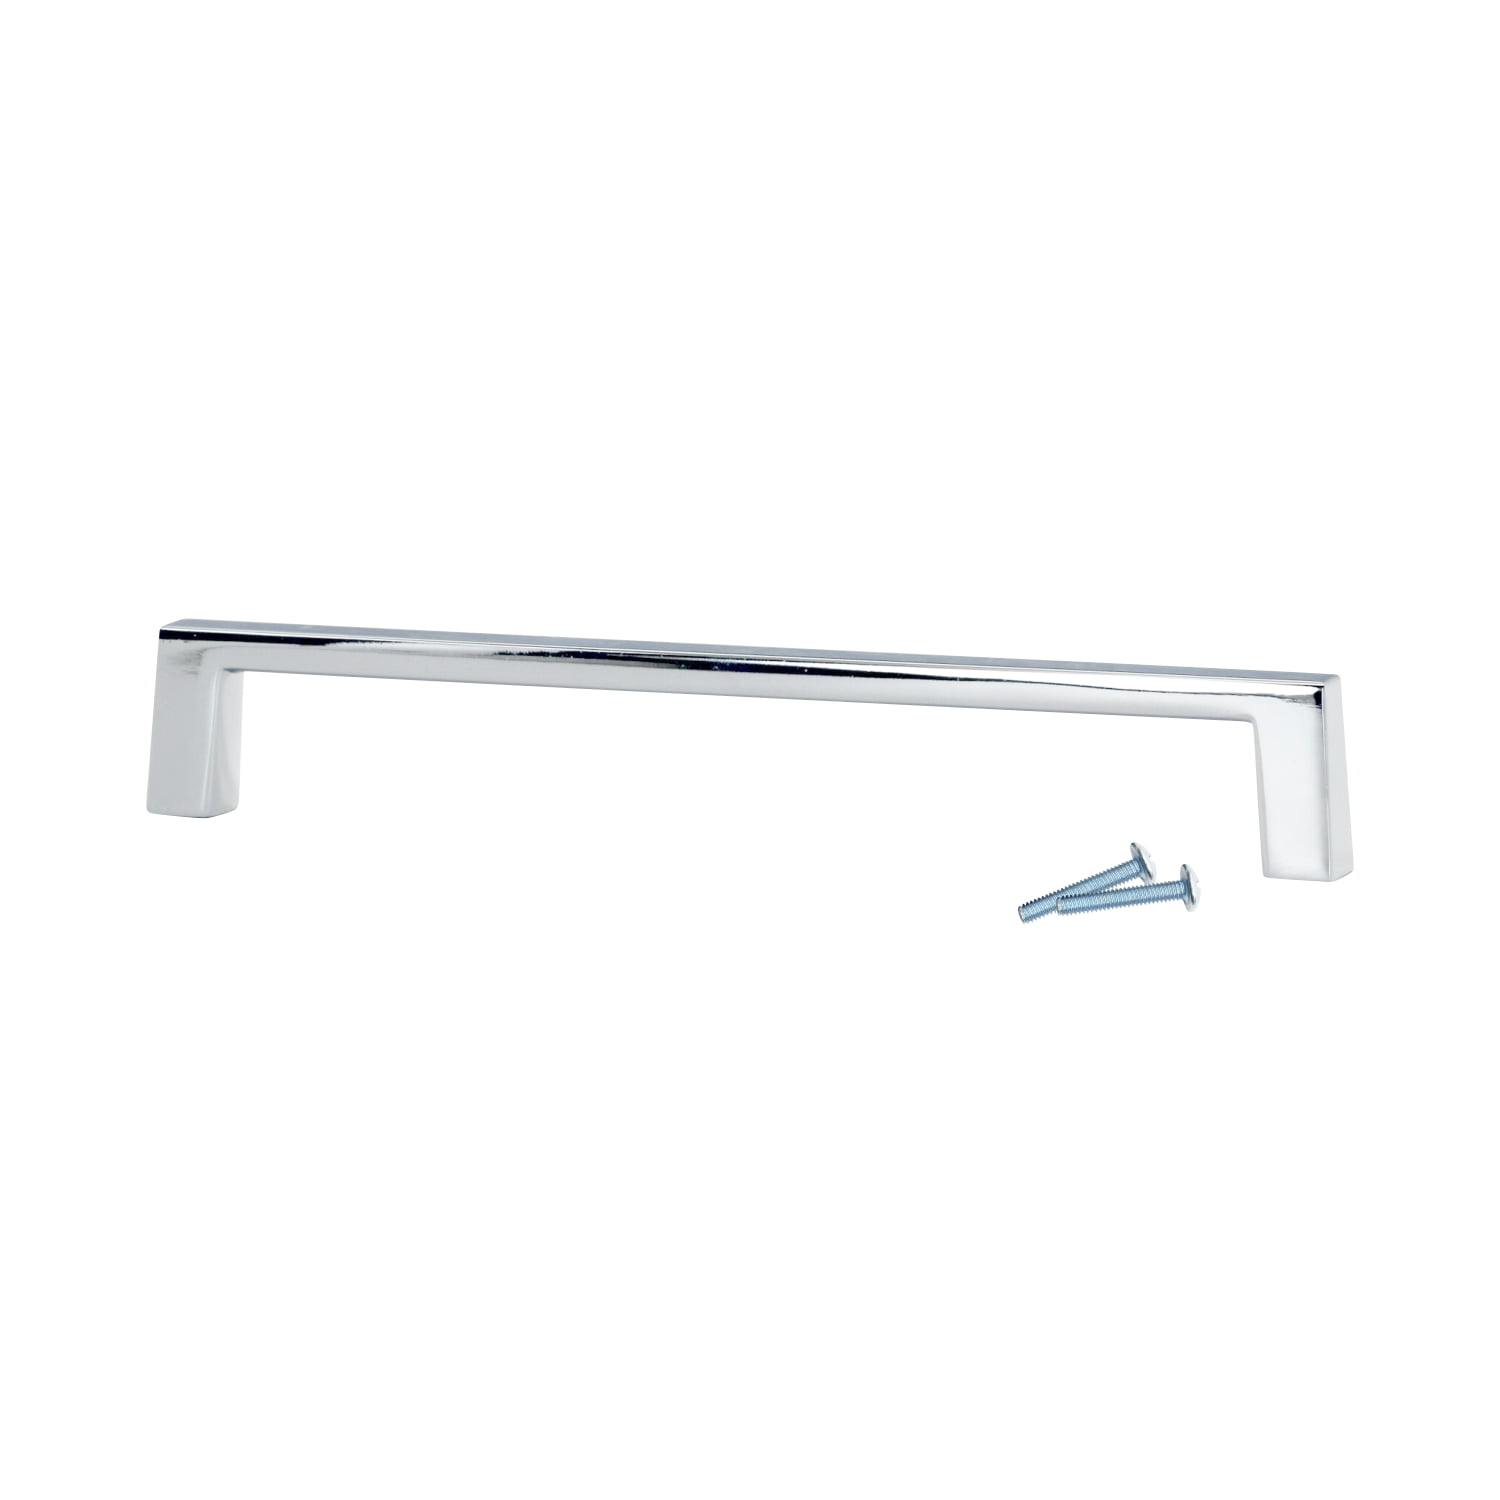 10 Pack Sleek Square Style 4 (102mm) Inch Center To Center, Overall Length  4-3/8 Chrome, Cabinet Hardware Pull / Handle